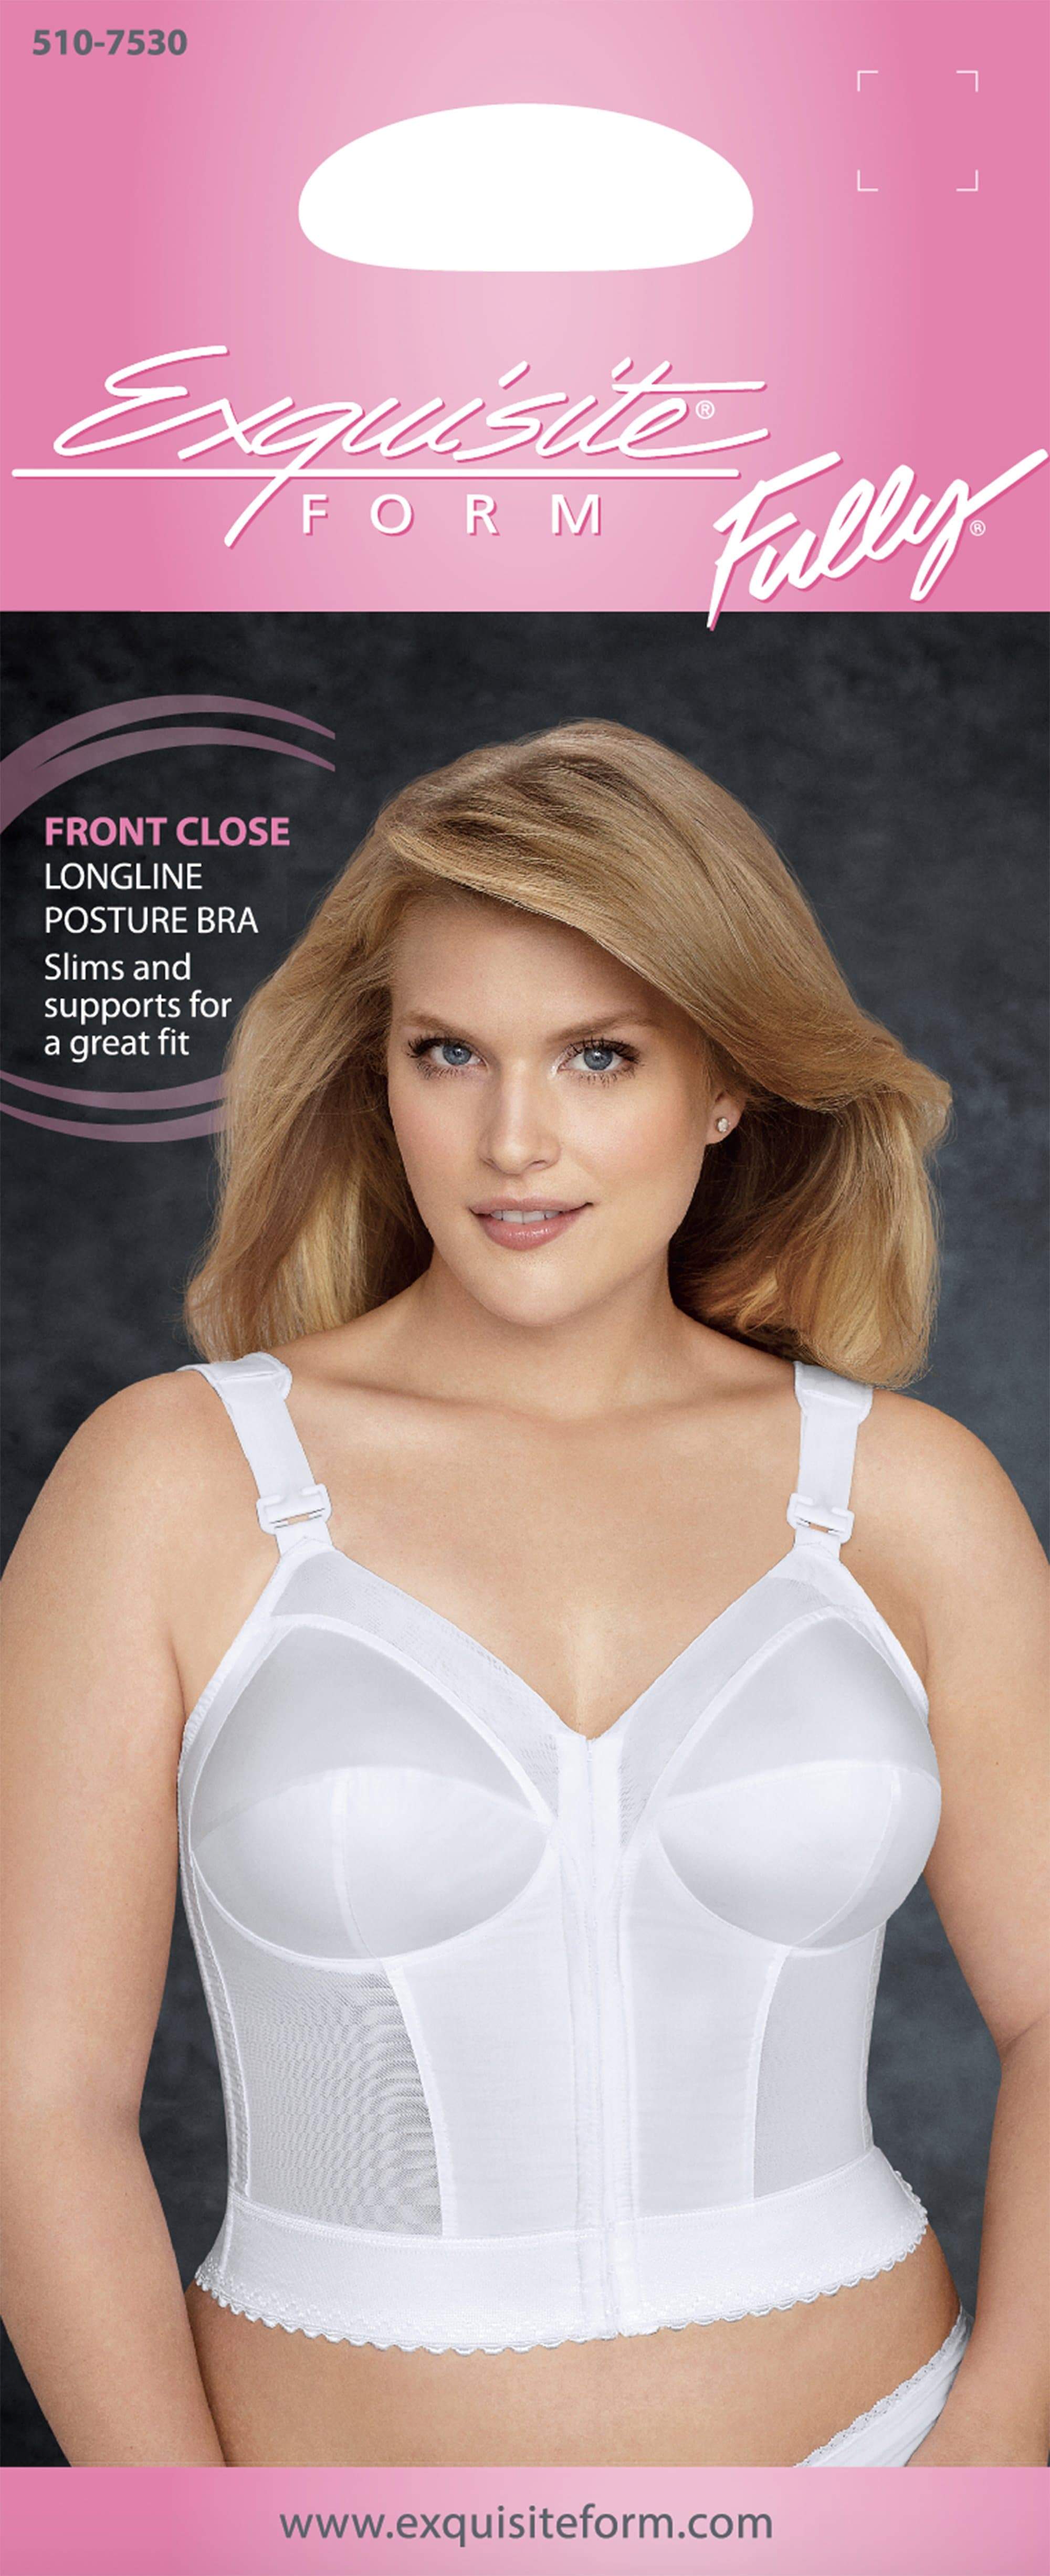 Exquisite Form Fully Front Close Longline Posture Bra - White - Curvy Bras